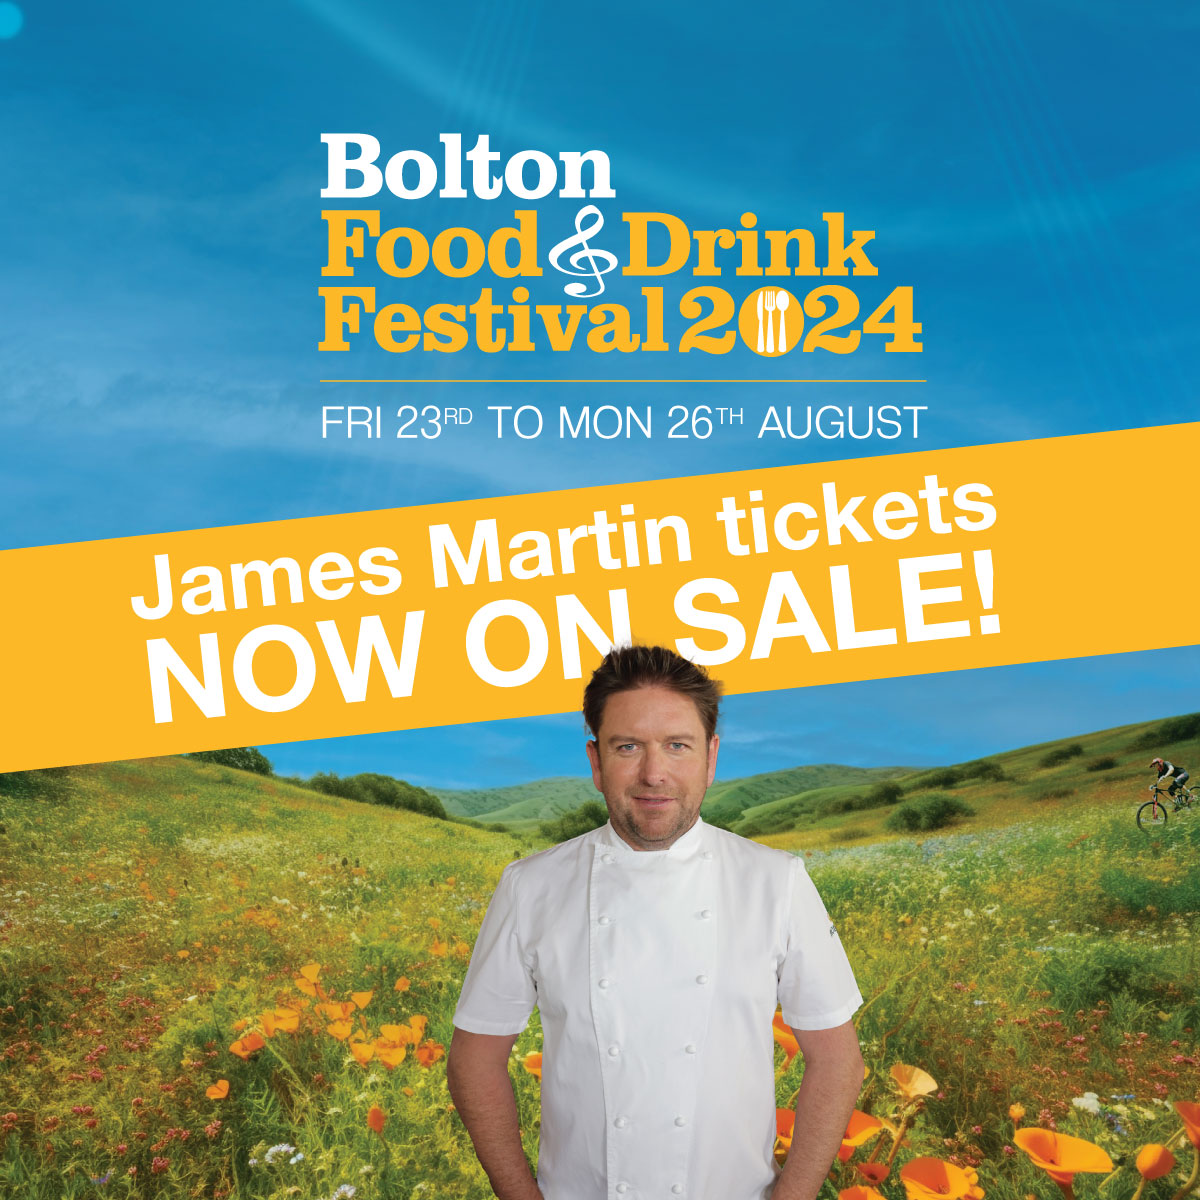 Did you guess correctly?🤔 James Martin tickets are now on sale for this August bank holiday weekend #BoltonFoodFest That’s right… you can get your tickets TODAY. Be quick as you don’t want to miss out. 📆Monday 26th August 2024 Visit boltonfoodanddrinkfestival.com